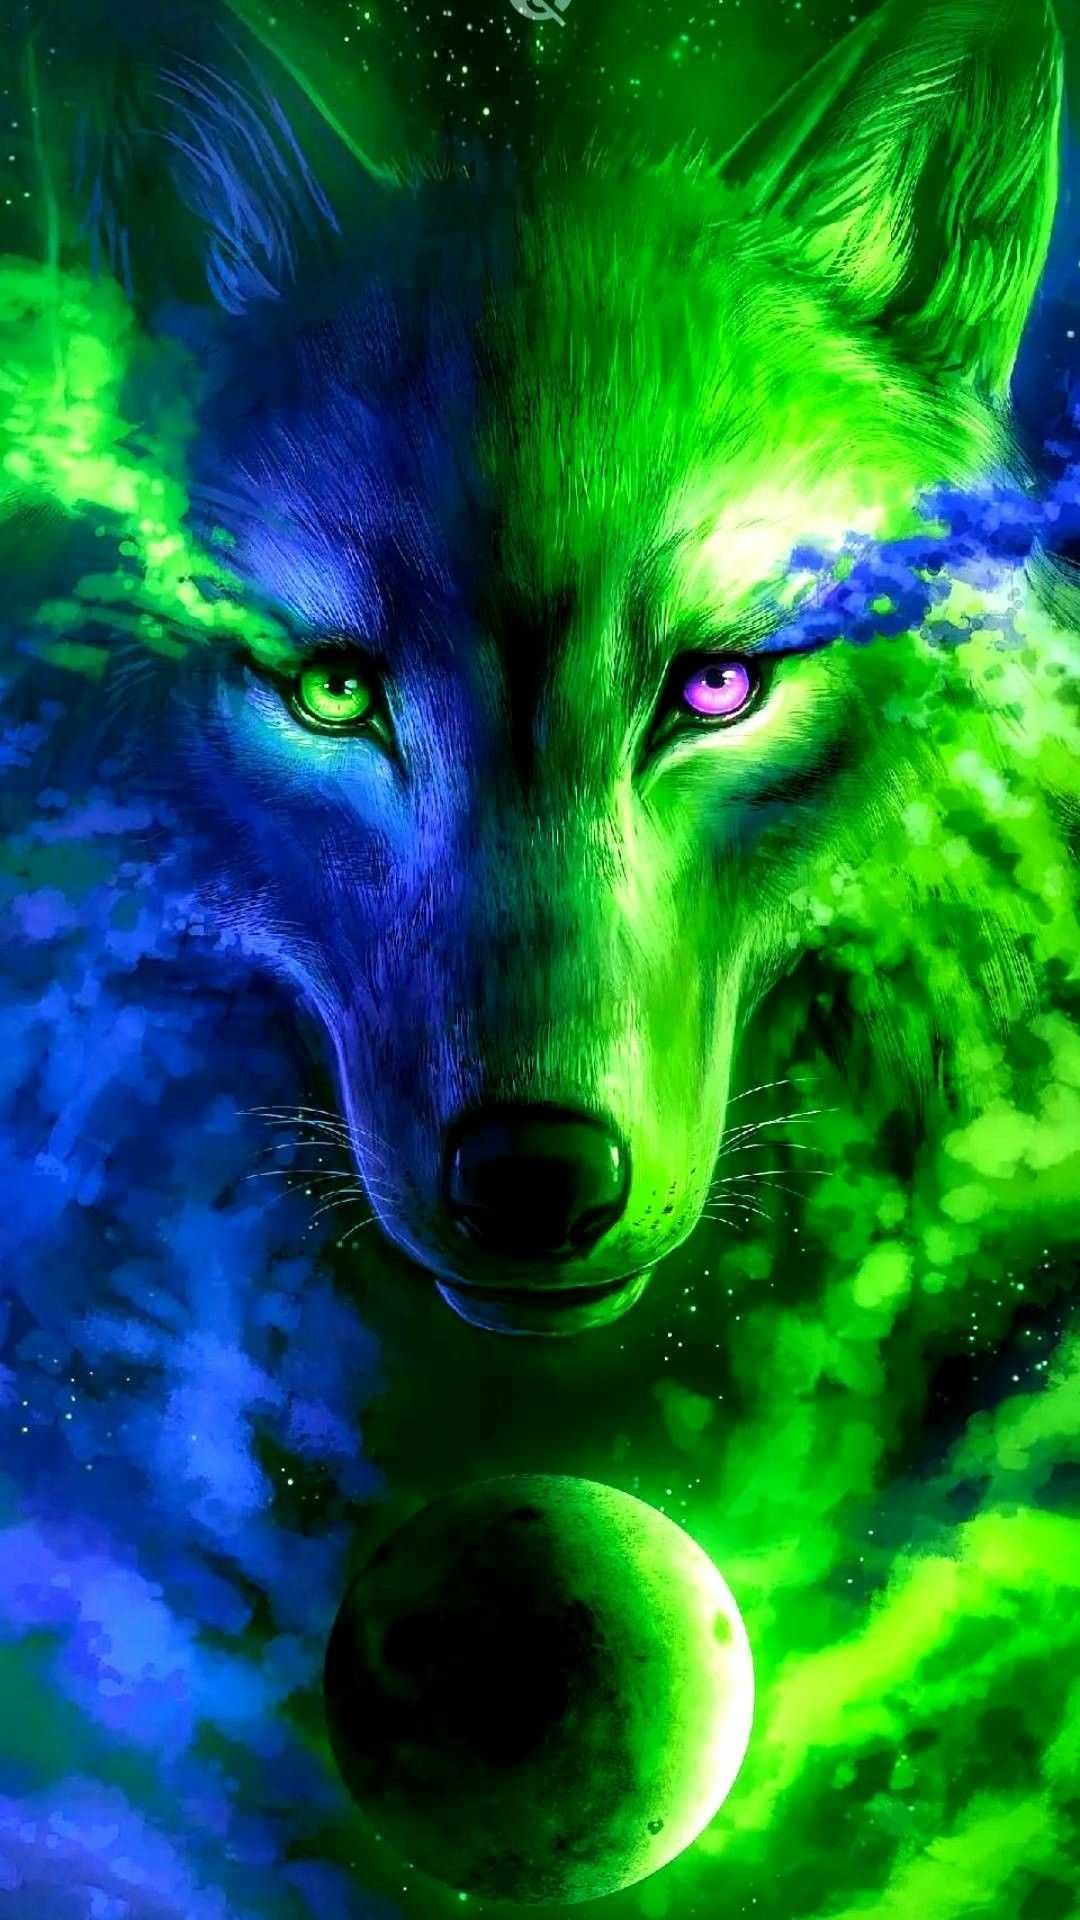 Anime Galaxy Wolf Wallpapers on WallpaperDog